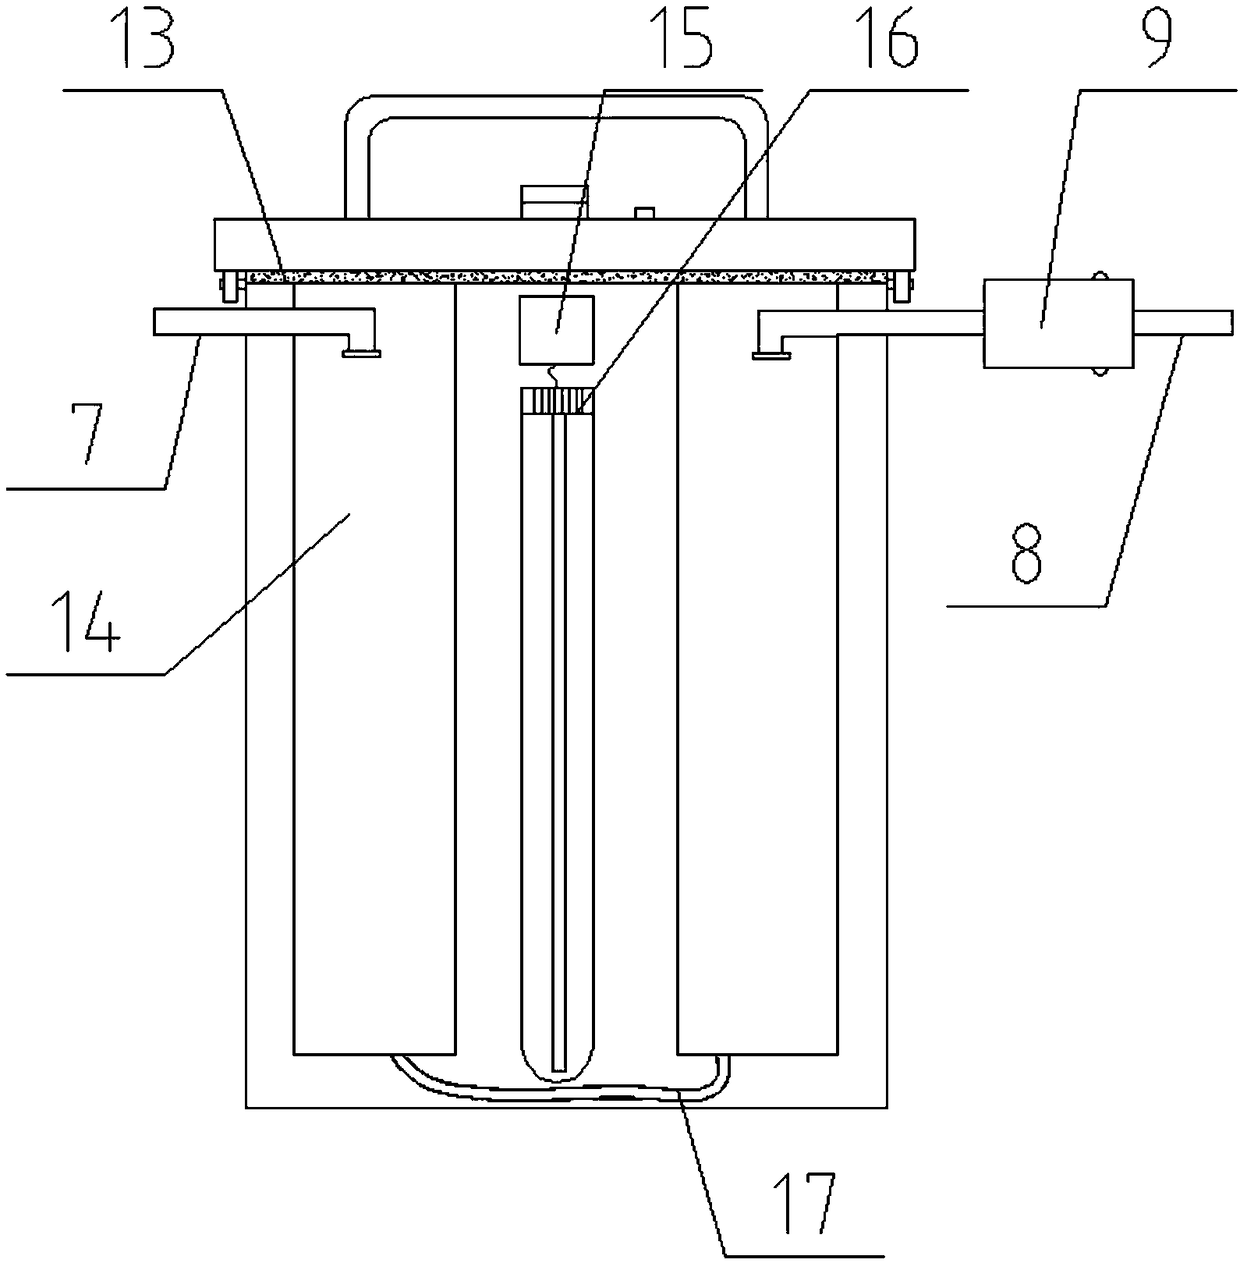 Portable liquid collecting device for medical treatment